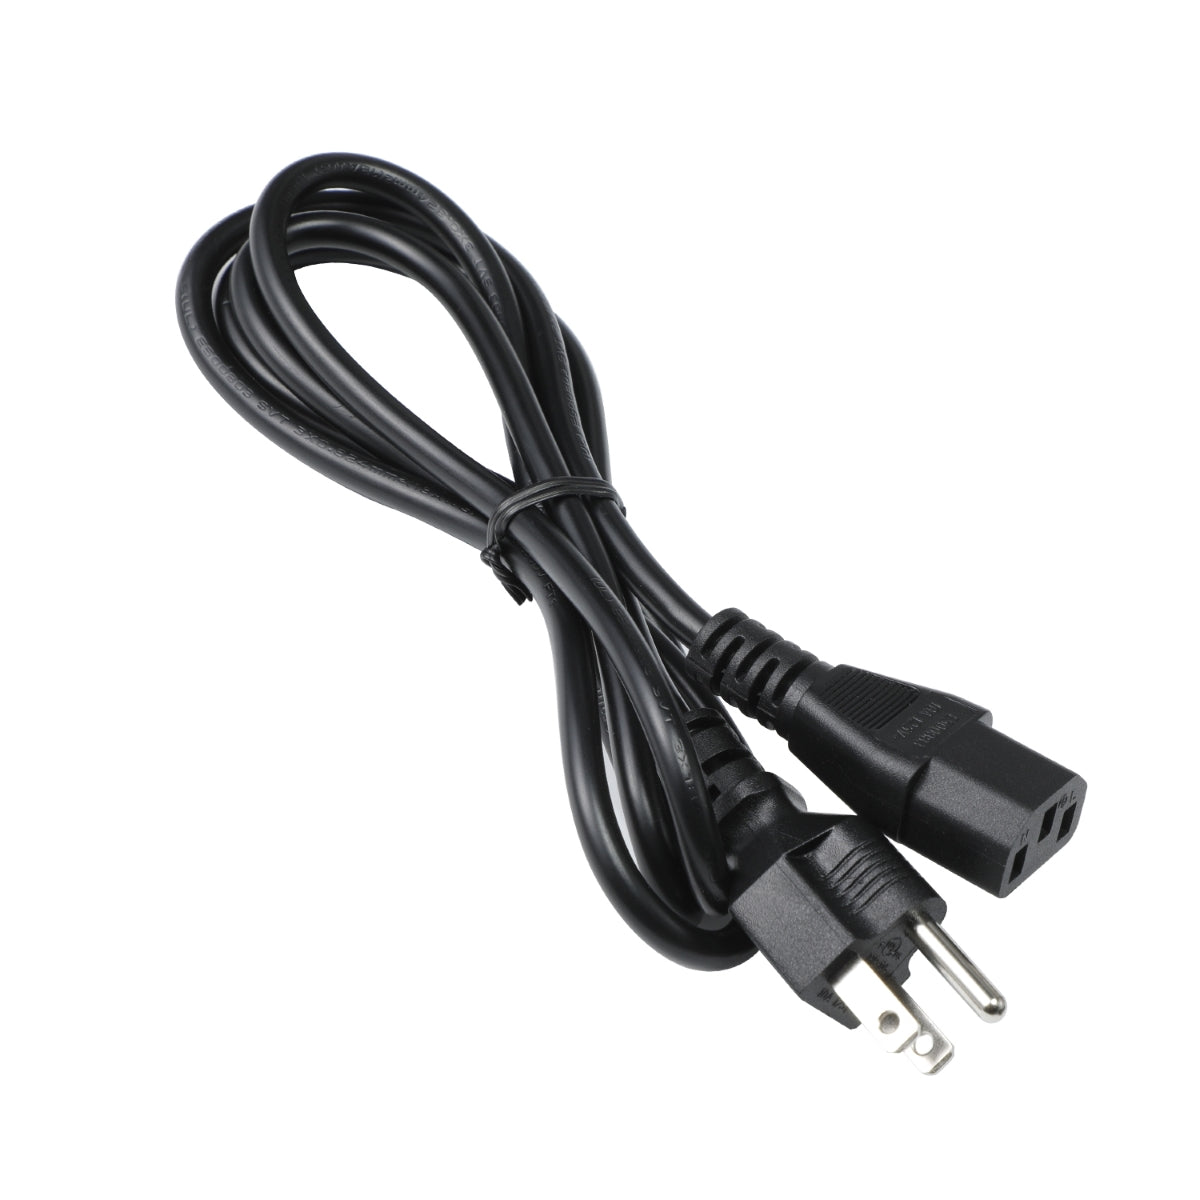 Power Cord for HP Pavilion Power 580 Computer.